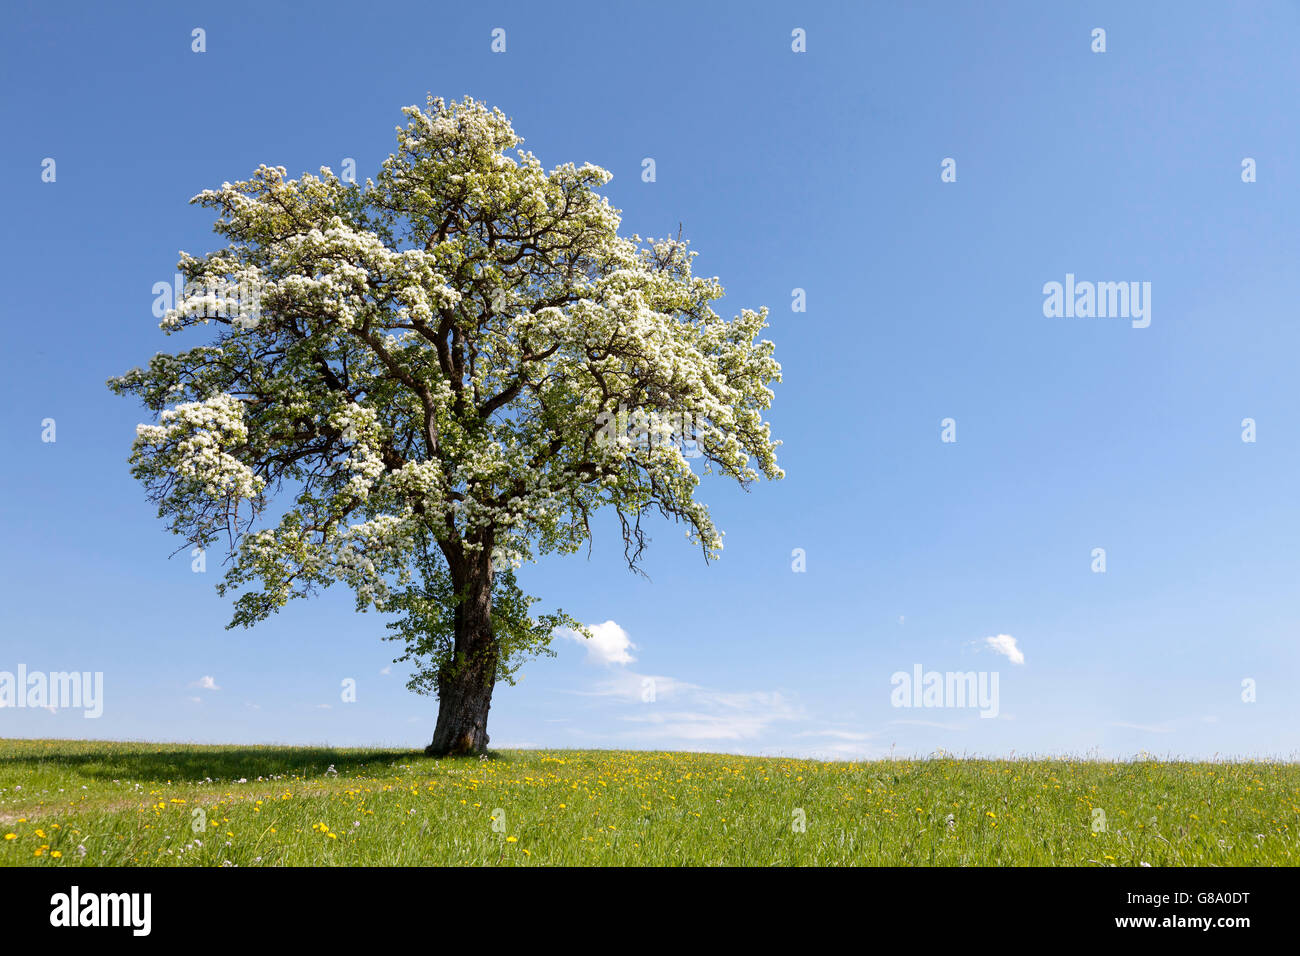 Blossoming fruit tree in a meadow, Mostviertel, Must Quarter, Lower Austria, Austria, Europe Stock Photo